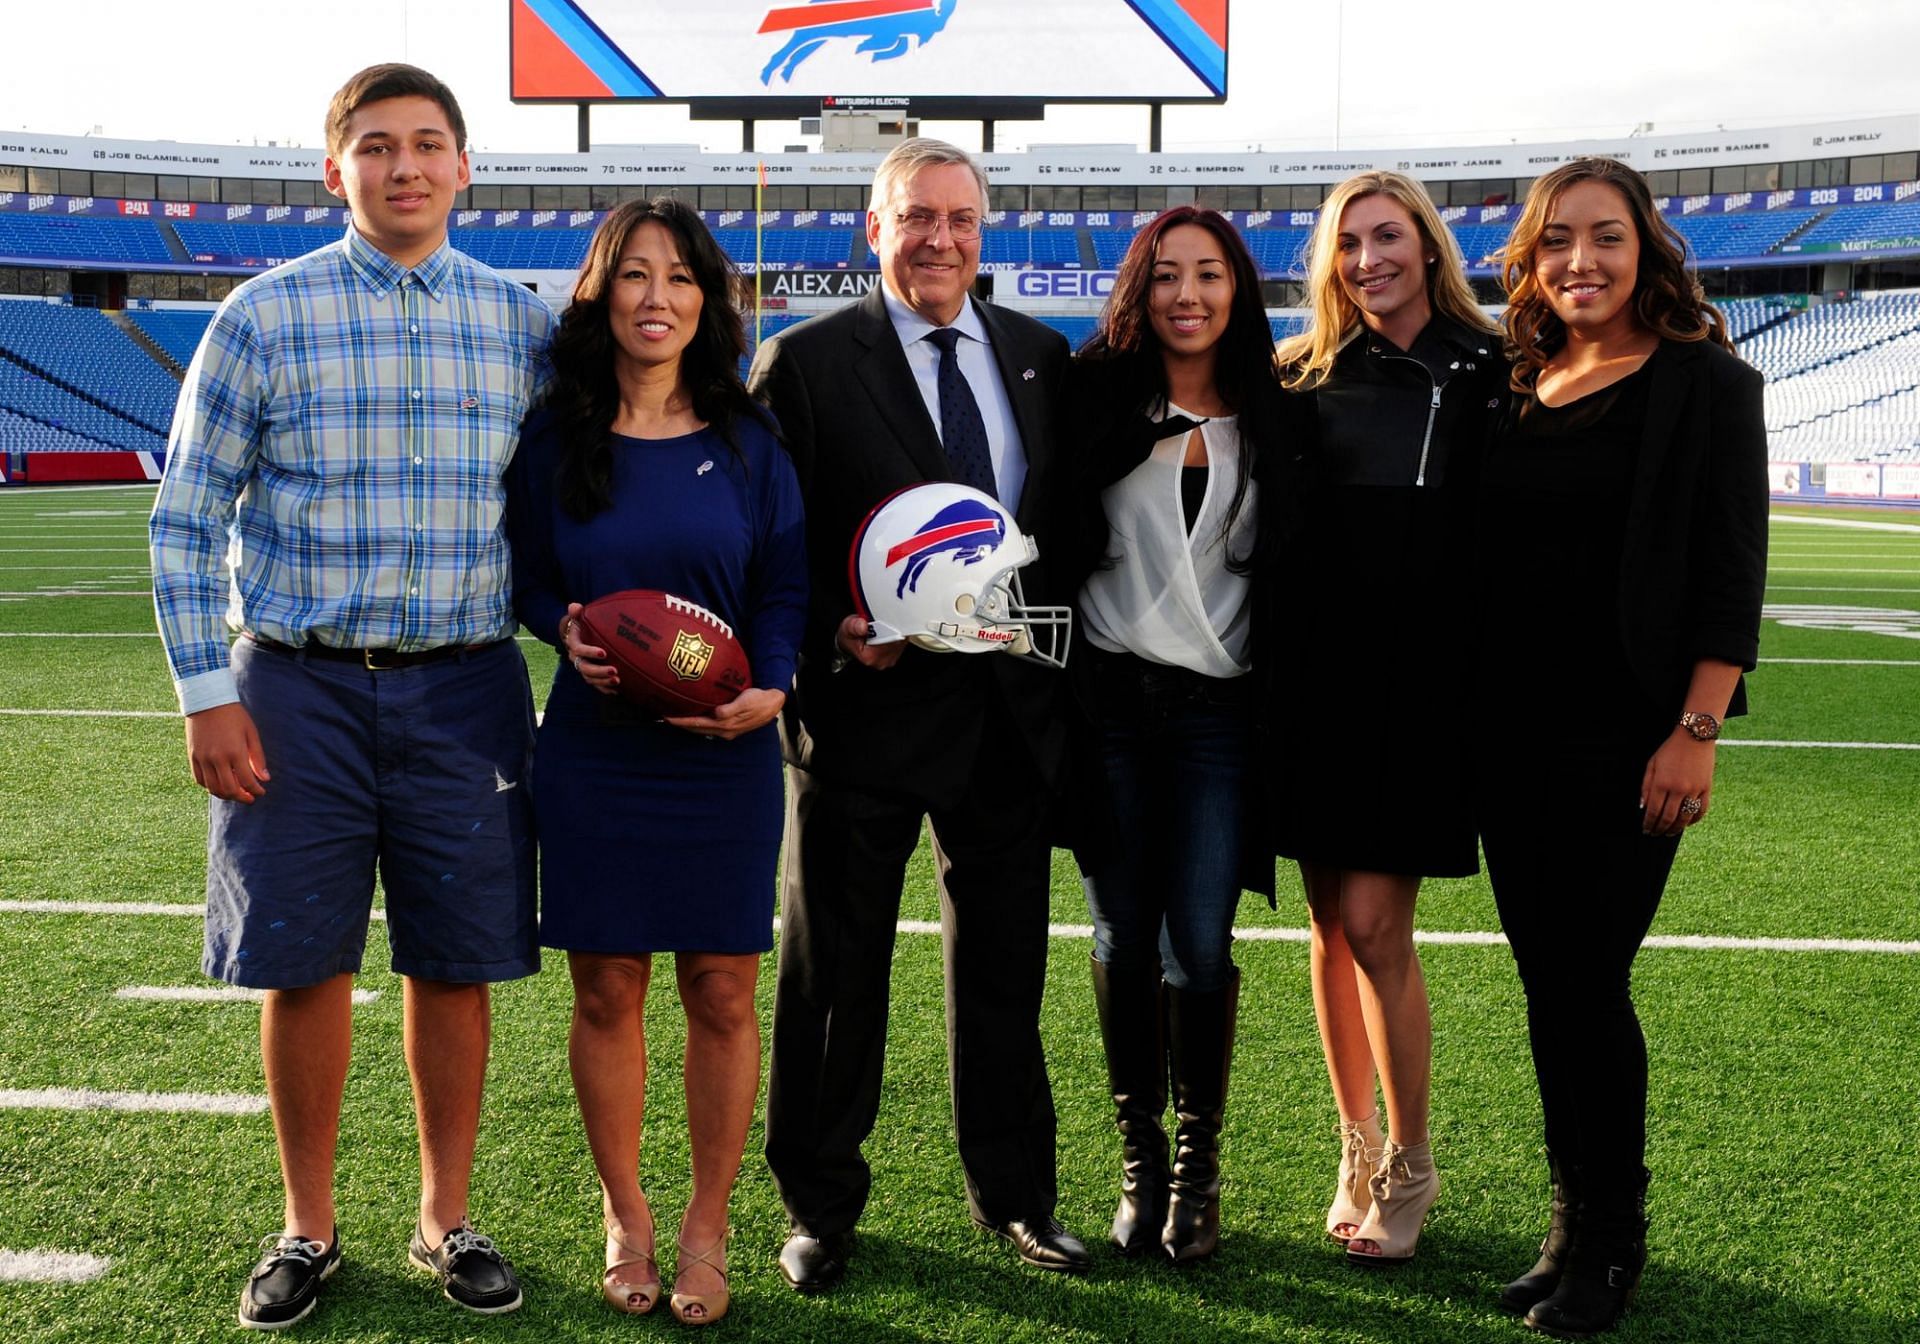 Terry Pegula with his wife and kids